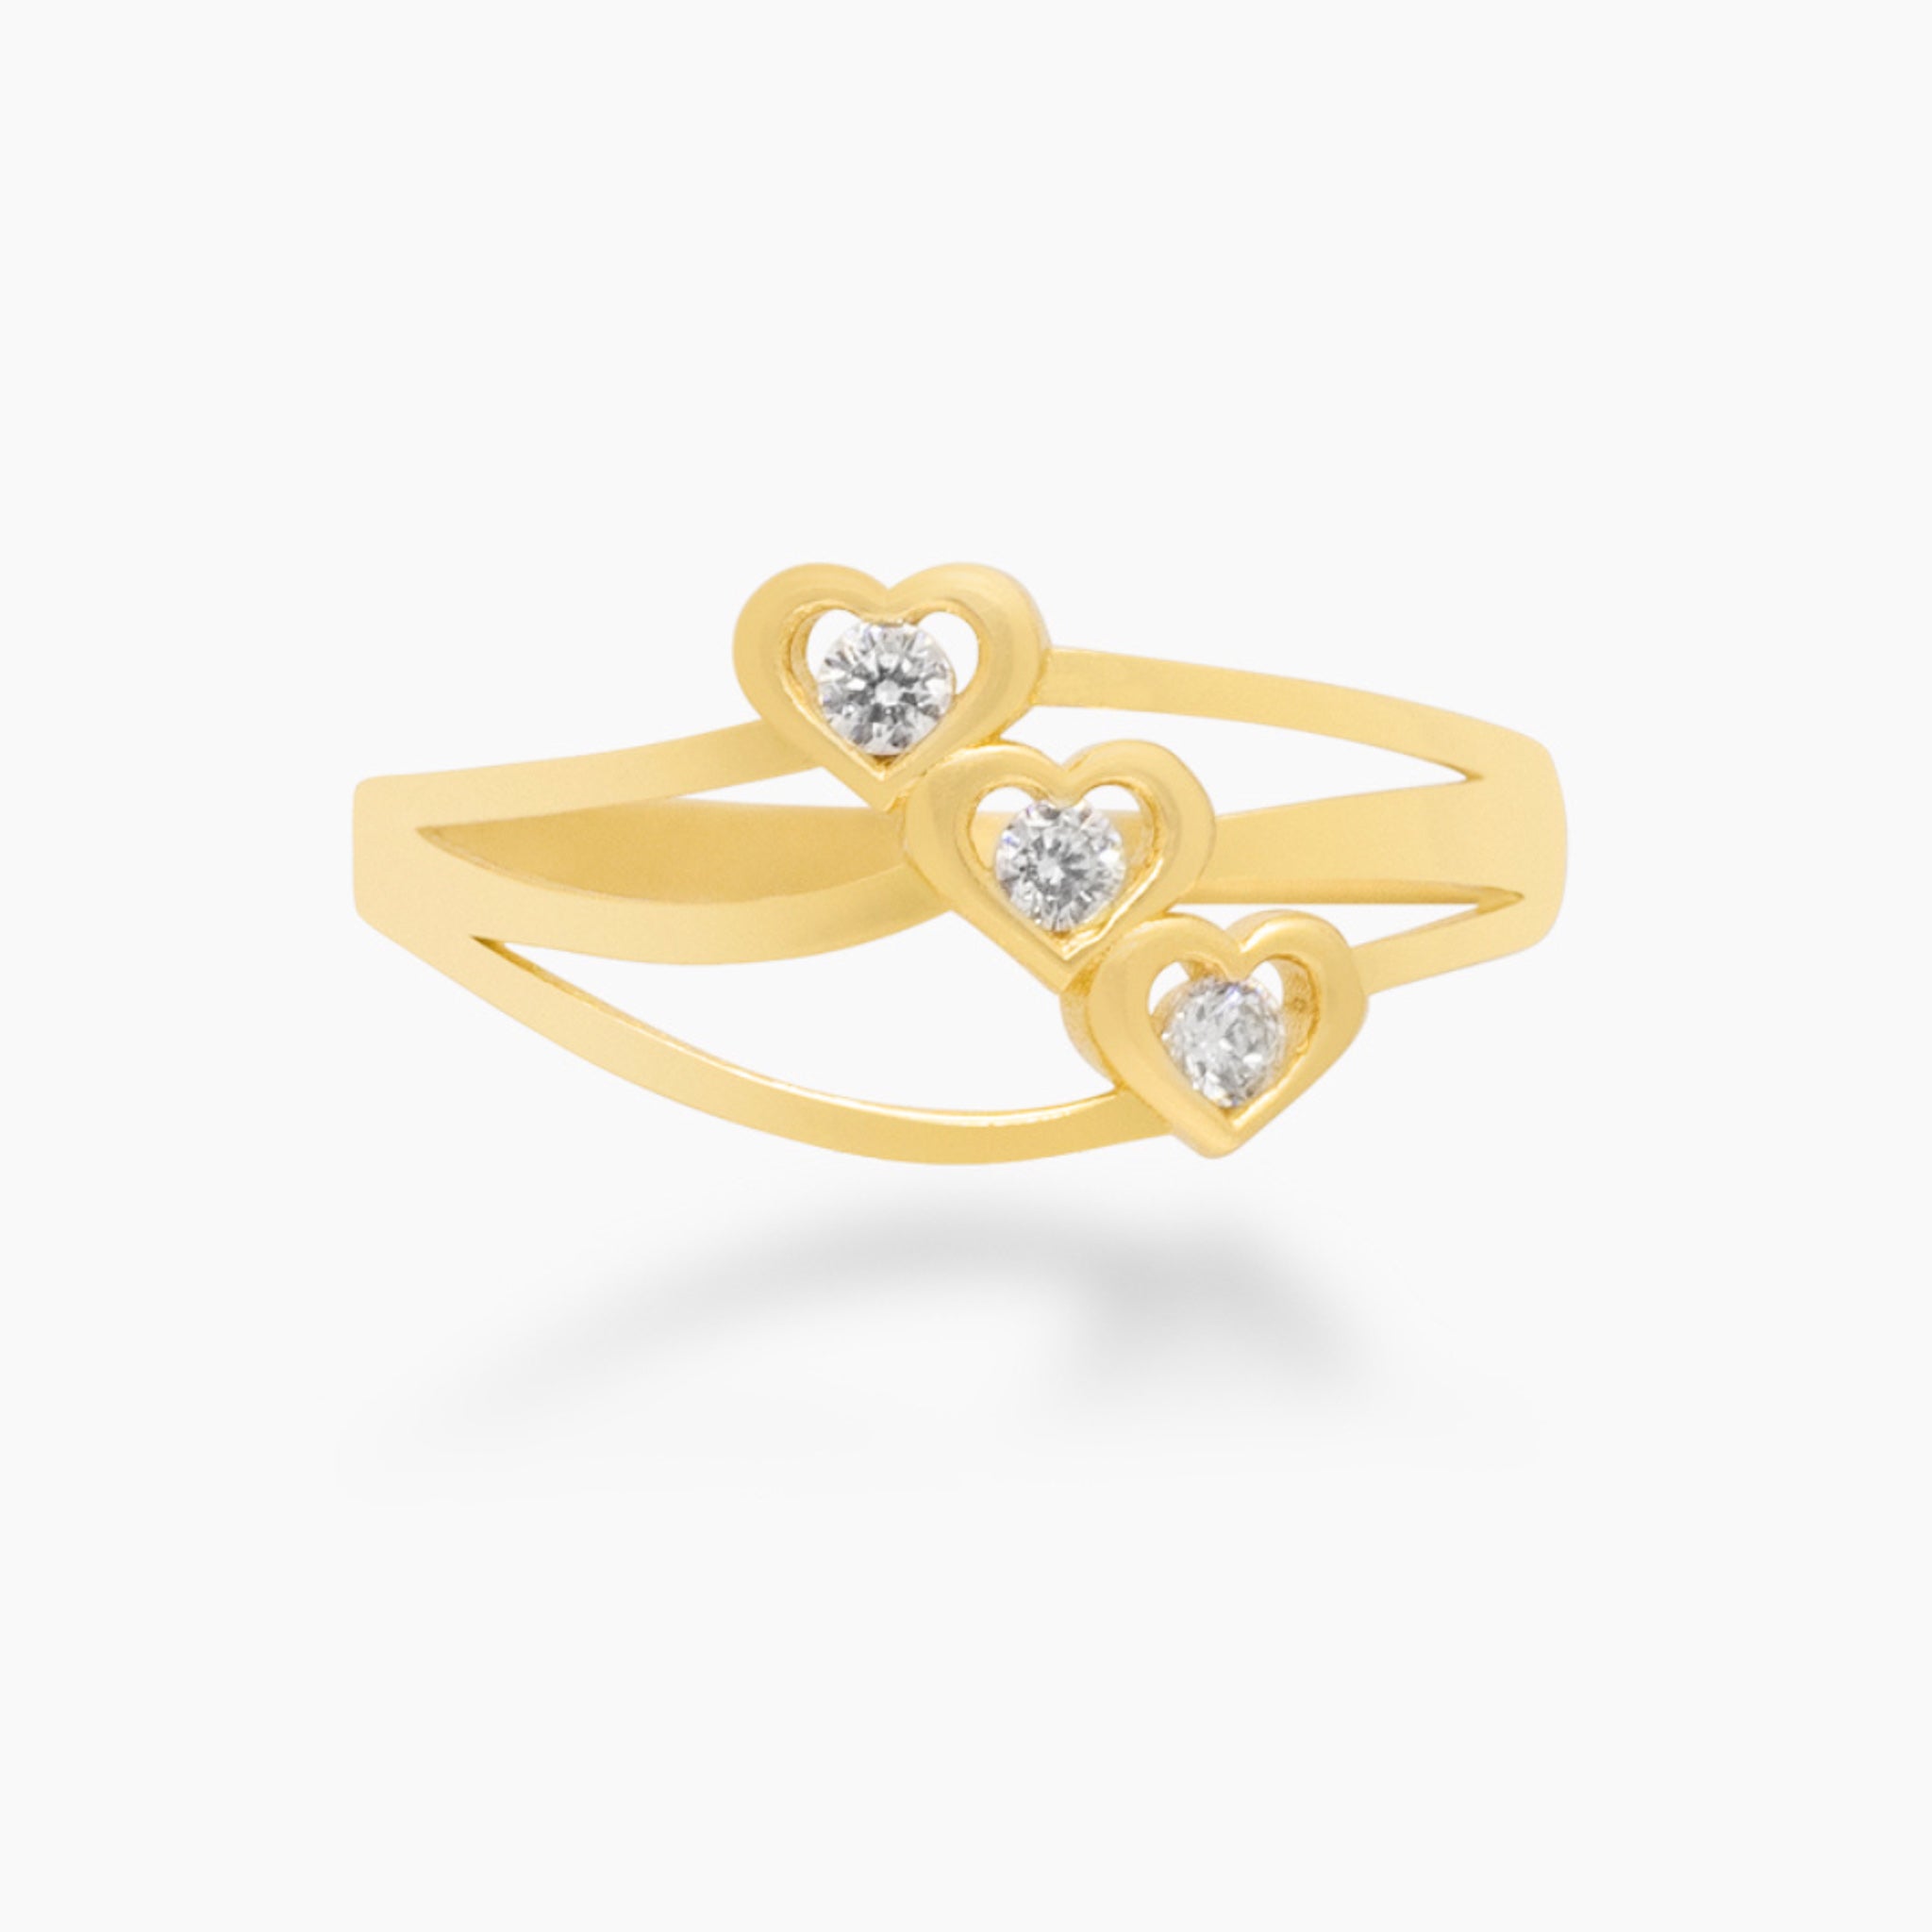 14K YELLOW GOLD ODESSEY HEART RING